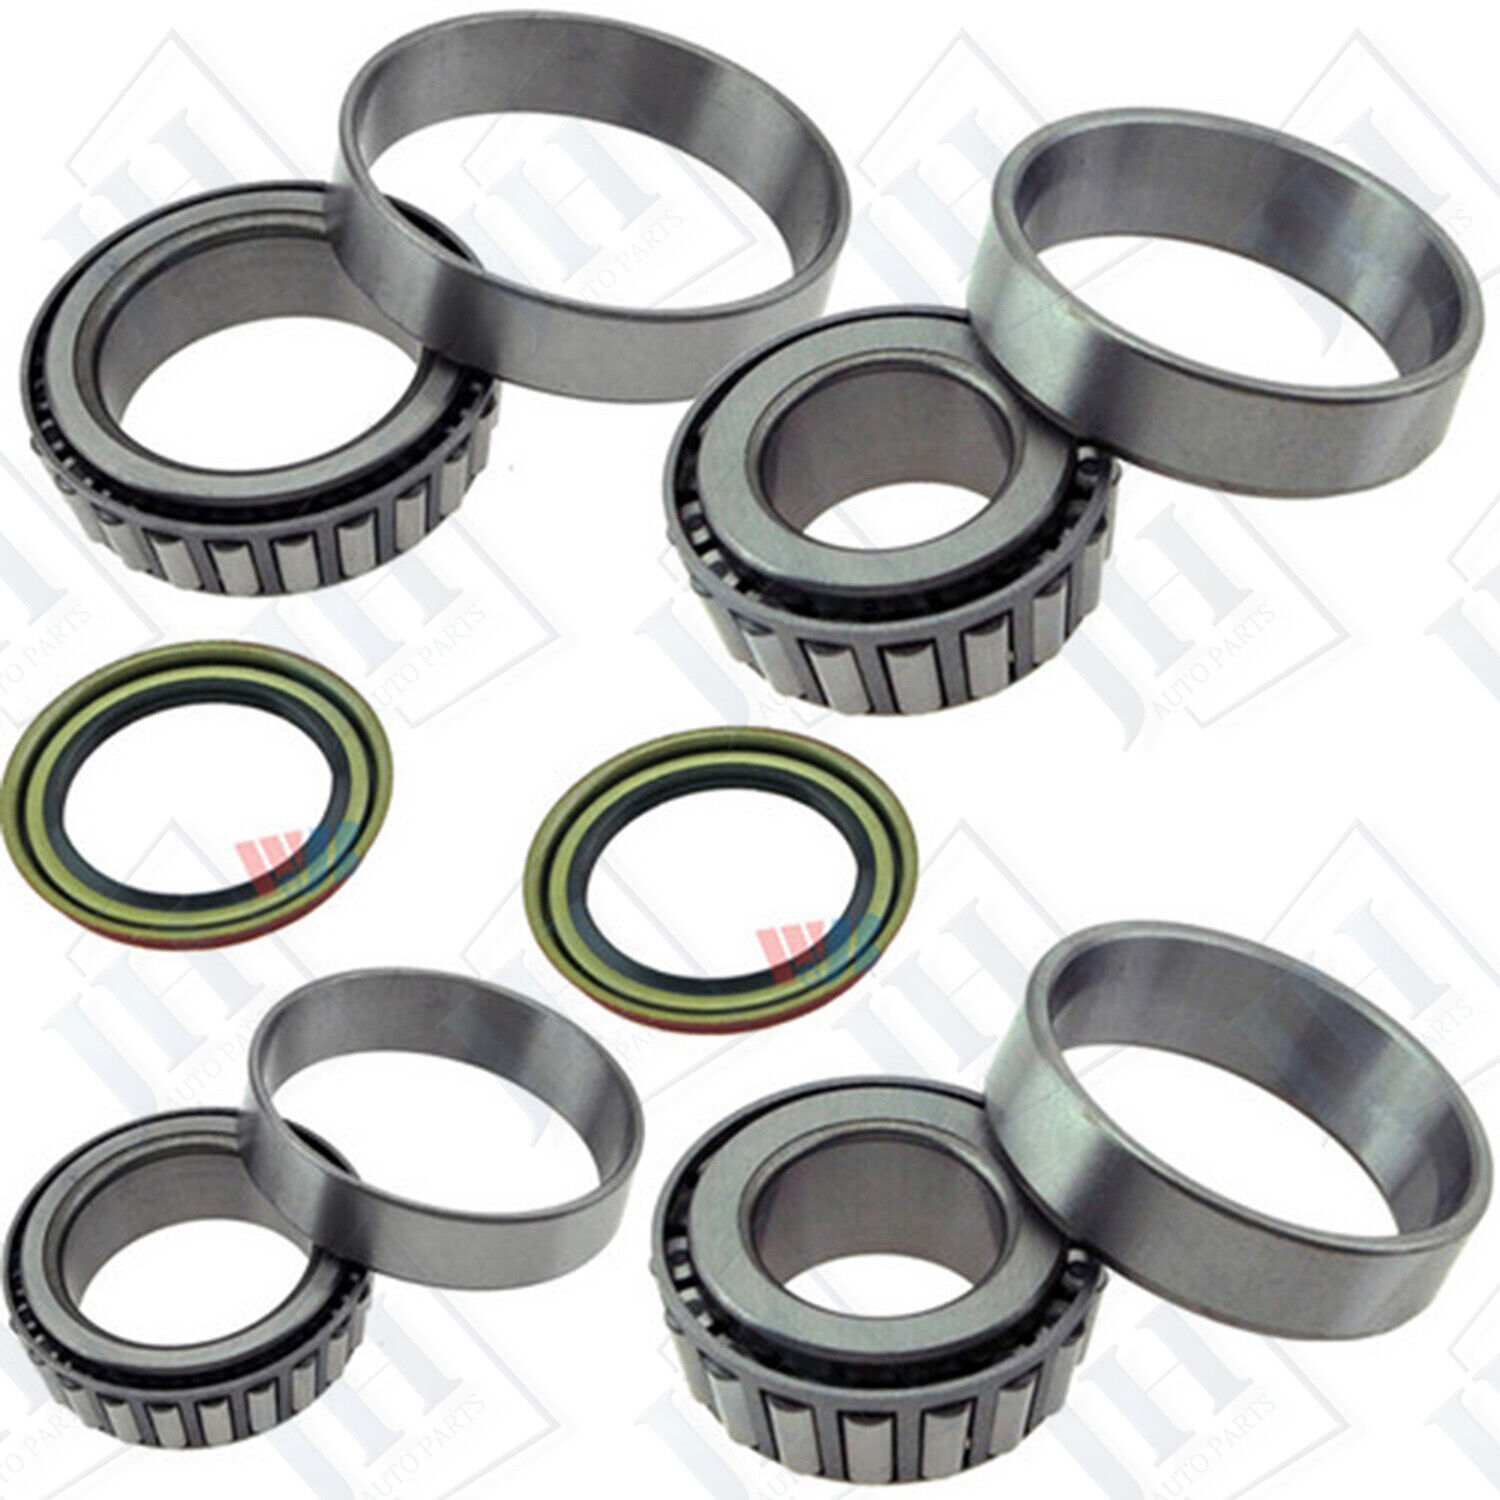 6Pcs Front Wheel Bearing & Race Set & Seal Kits Assembly For Ford F-150 US STOCK